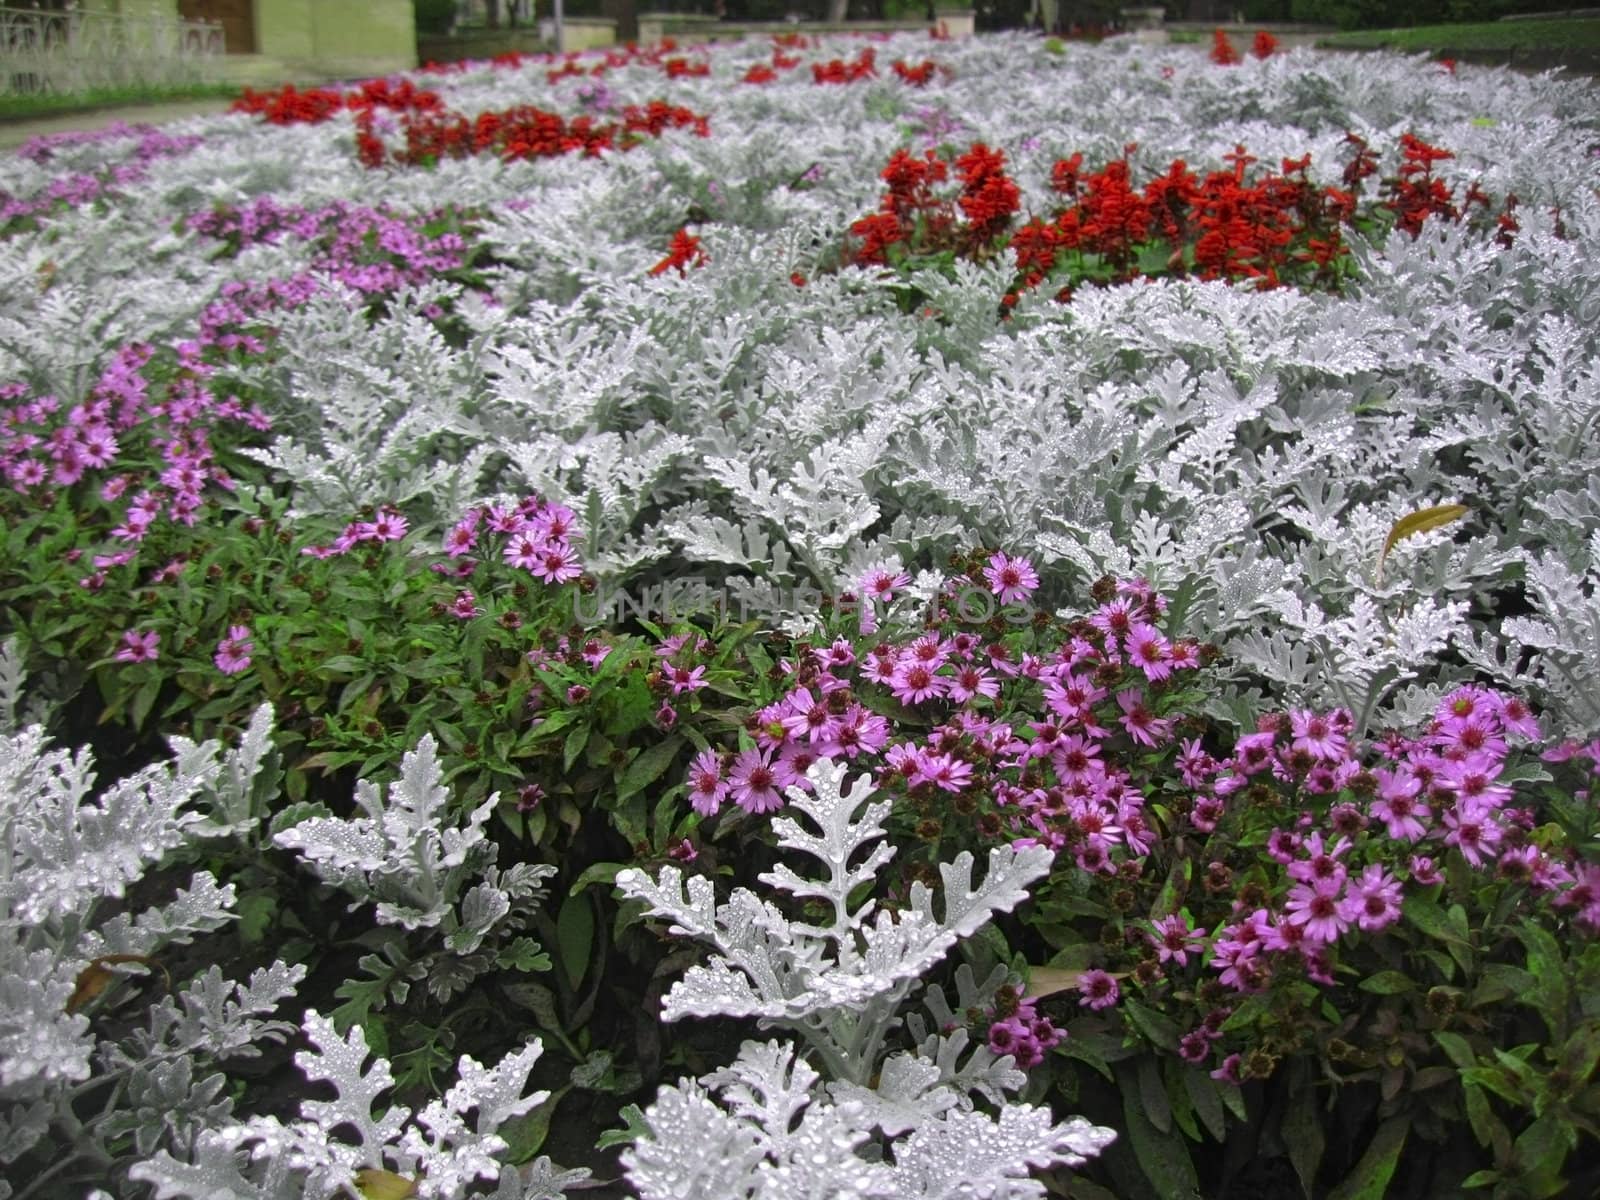 Bed of flowers after rain. Cineraria, salvia, rudbekia by scullery